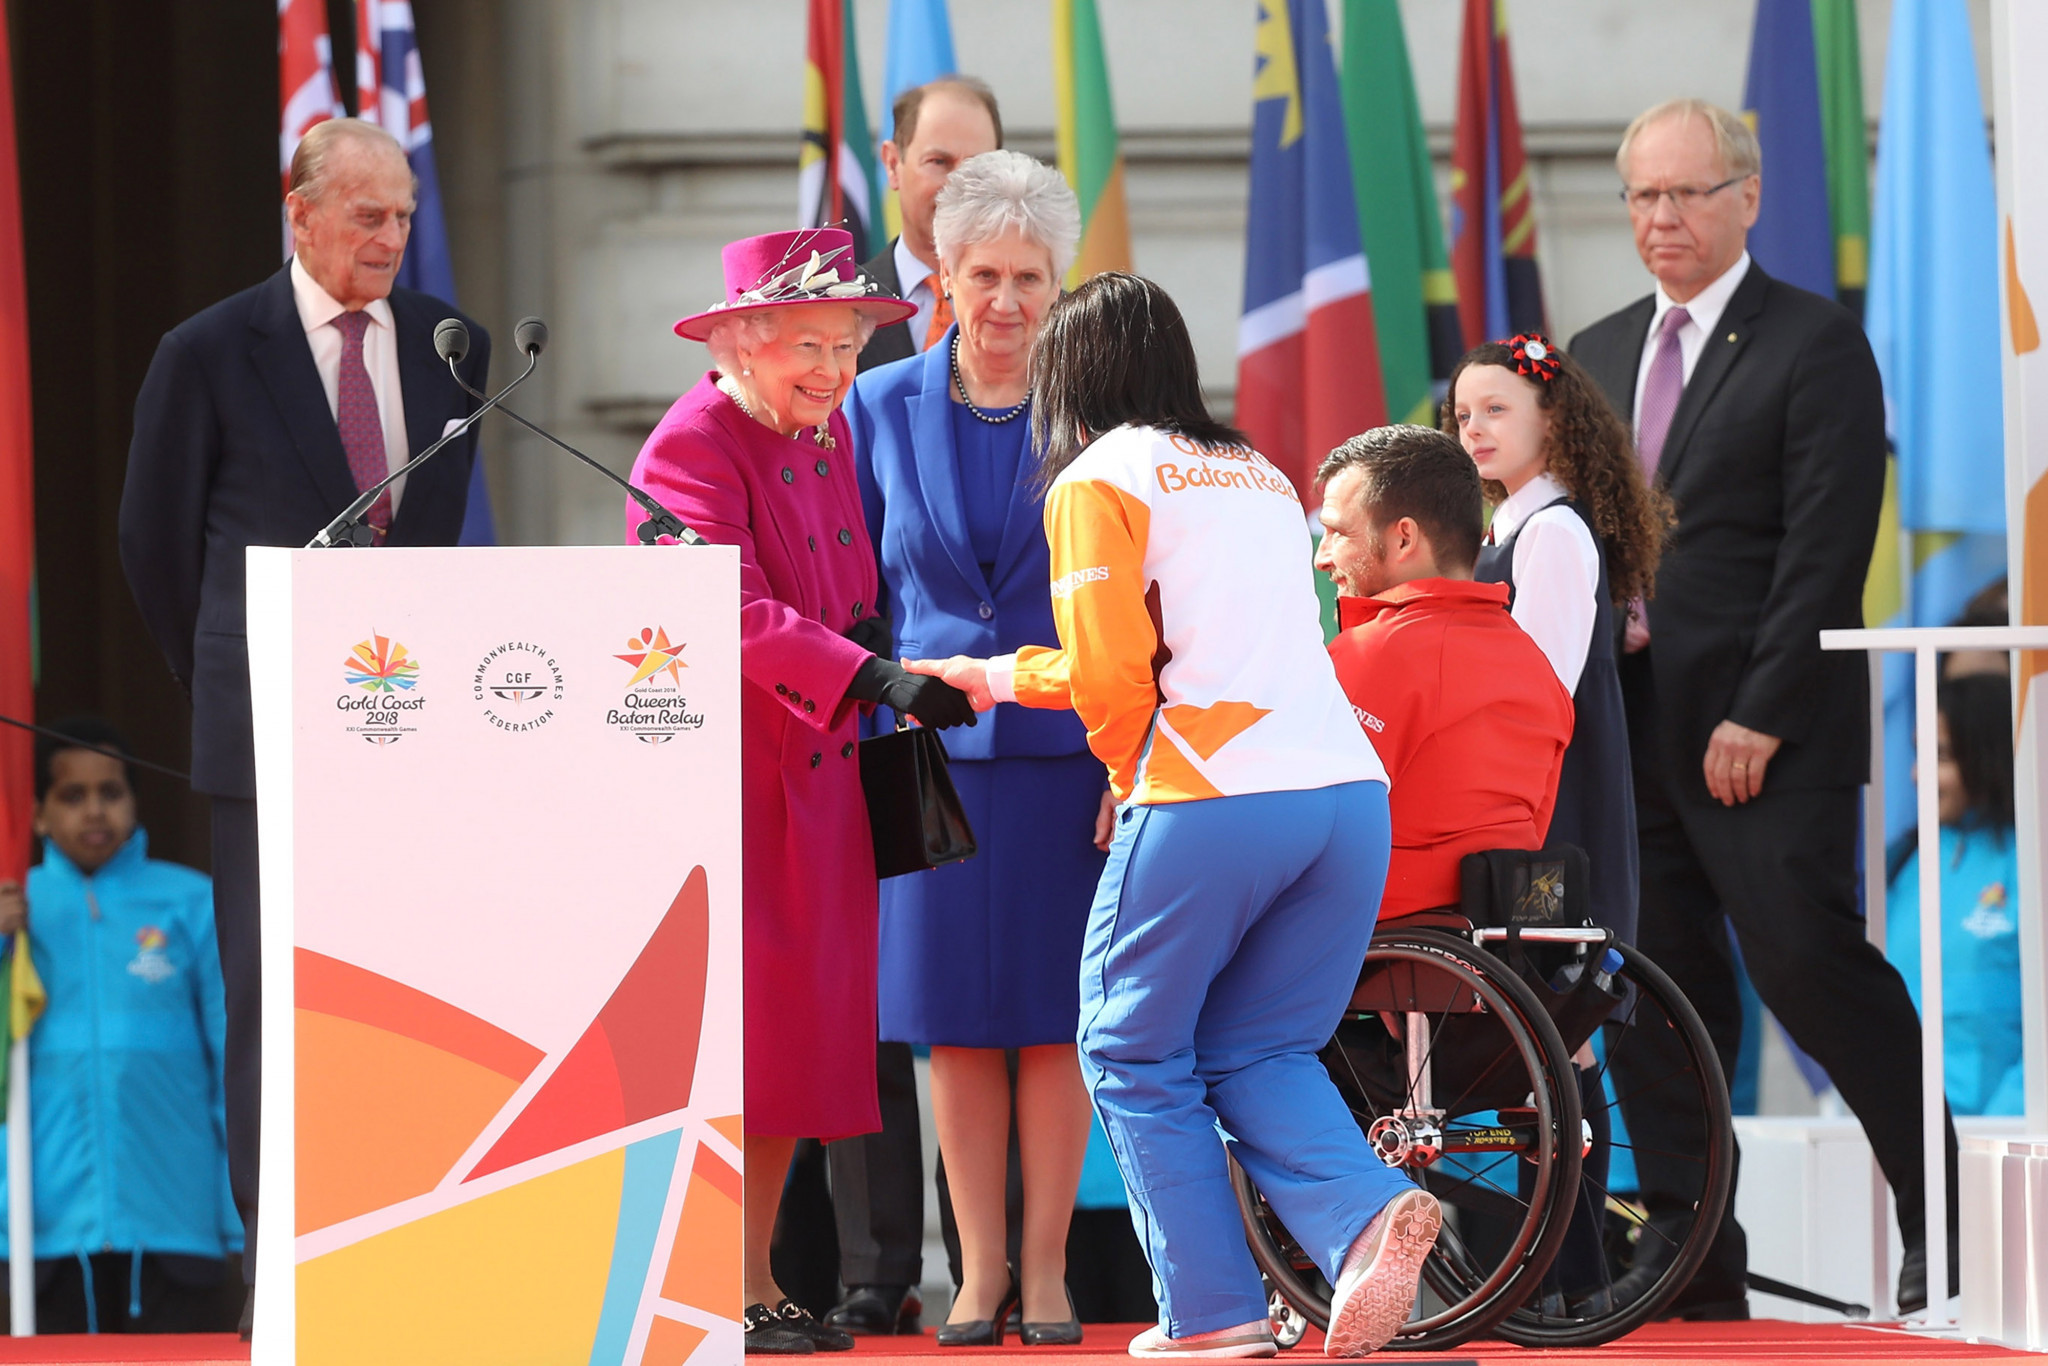 Queen Elizabeth II at the Queen's Baton Relay before the Gold Coast 2018 Commonwealth Games, as she shakes hands with cyclist Anna Meares ©Getty Images